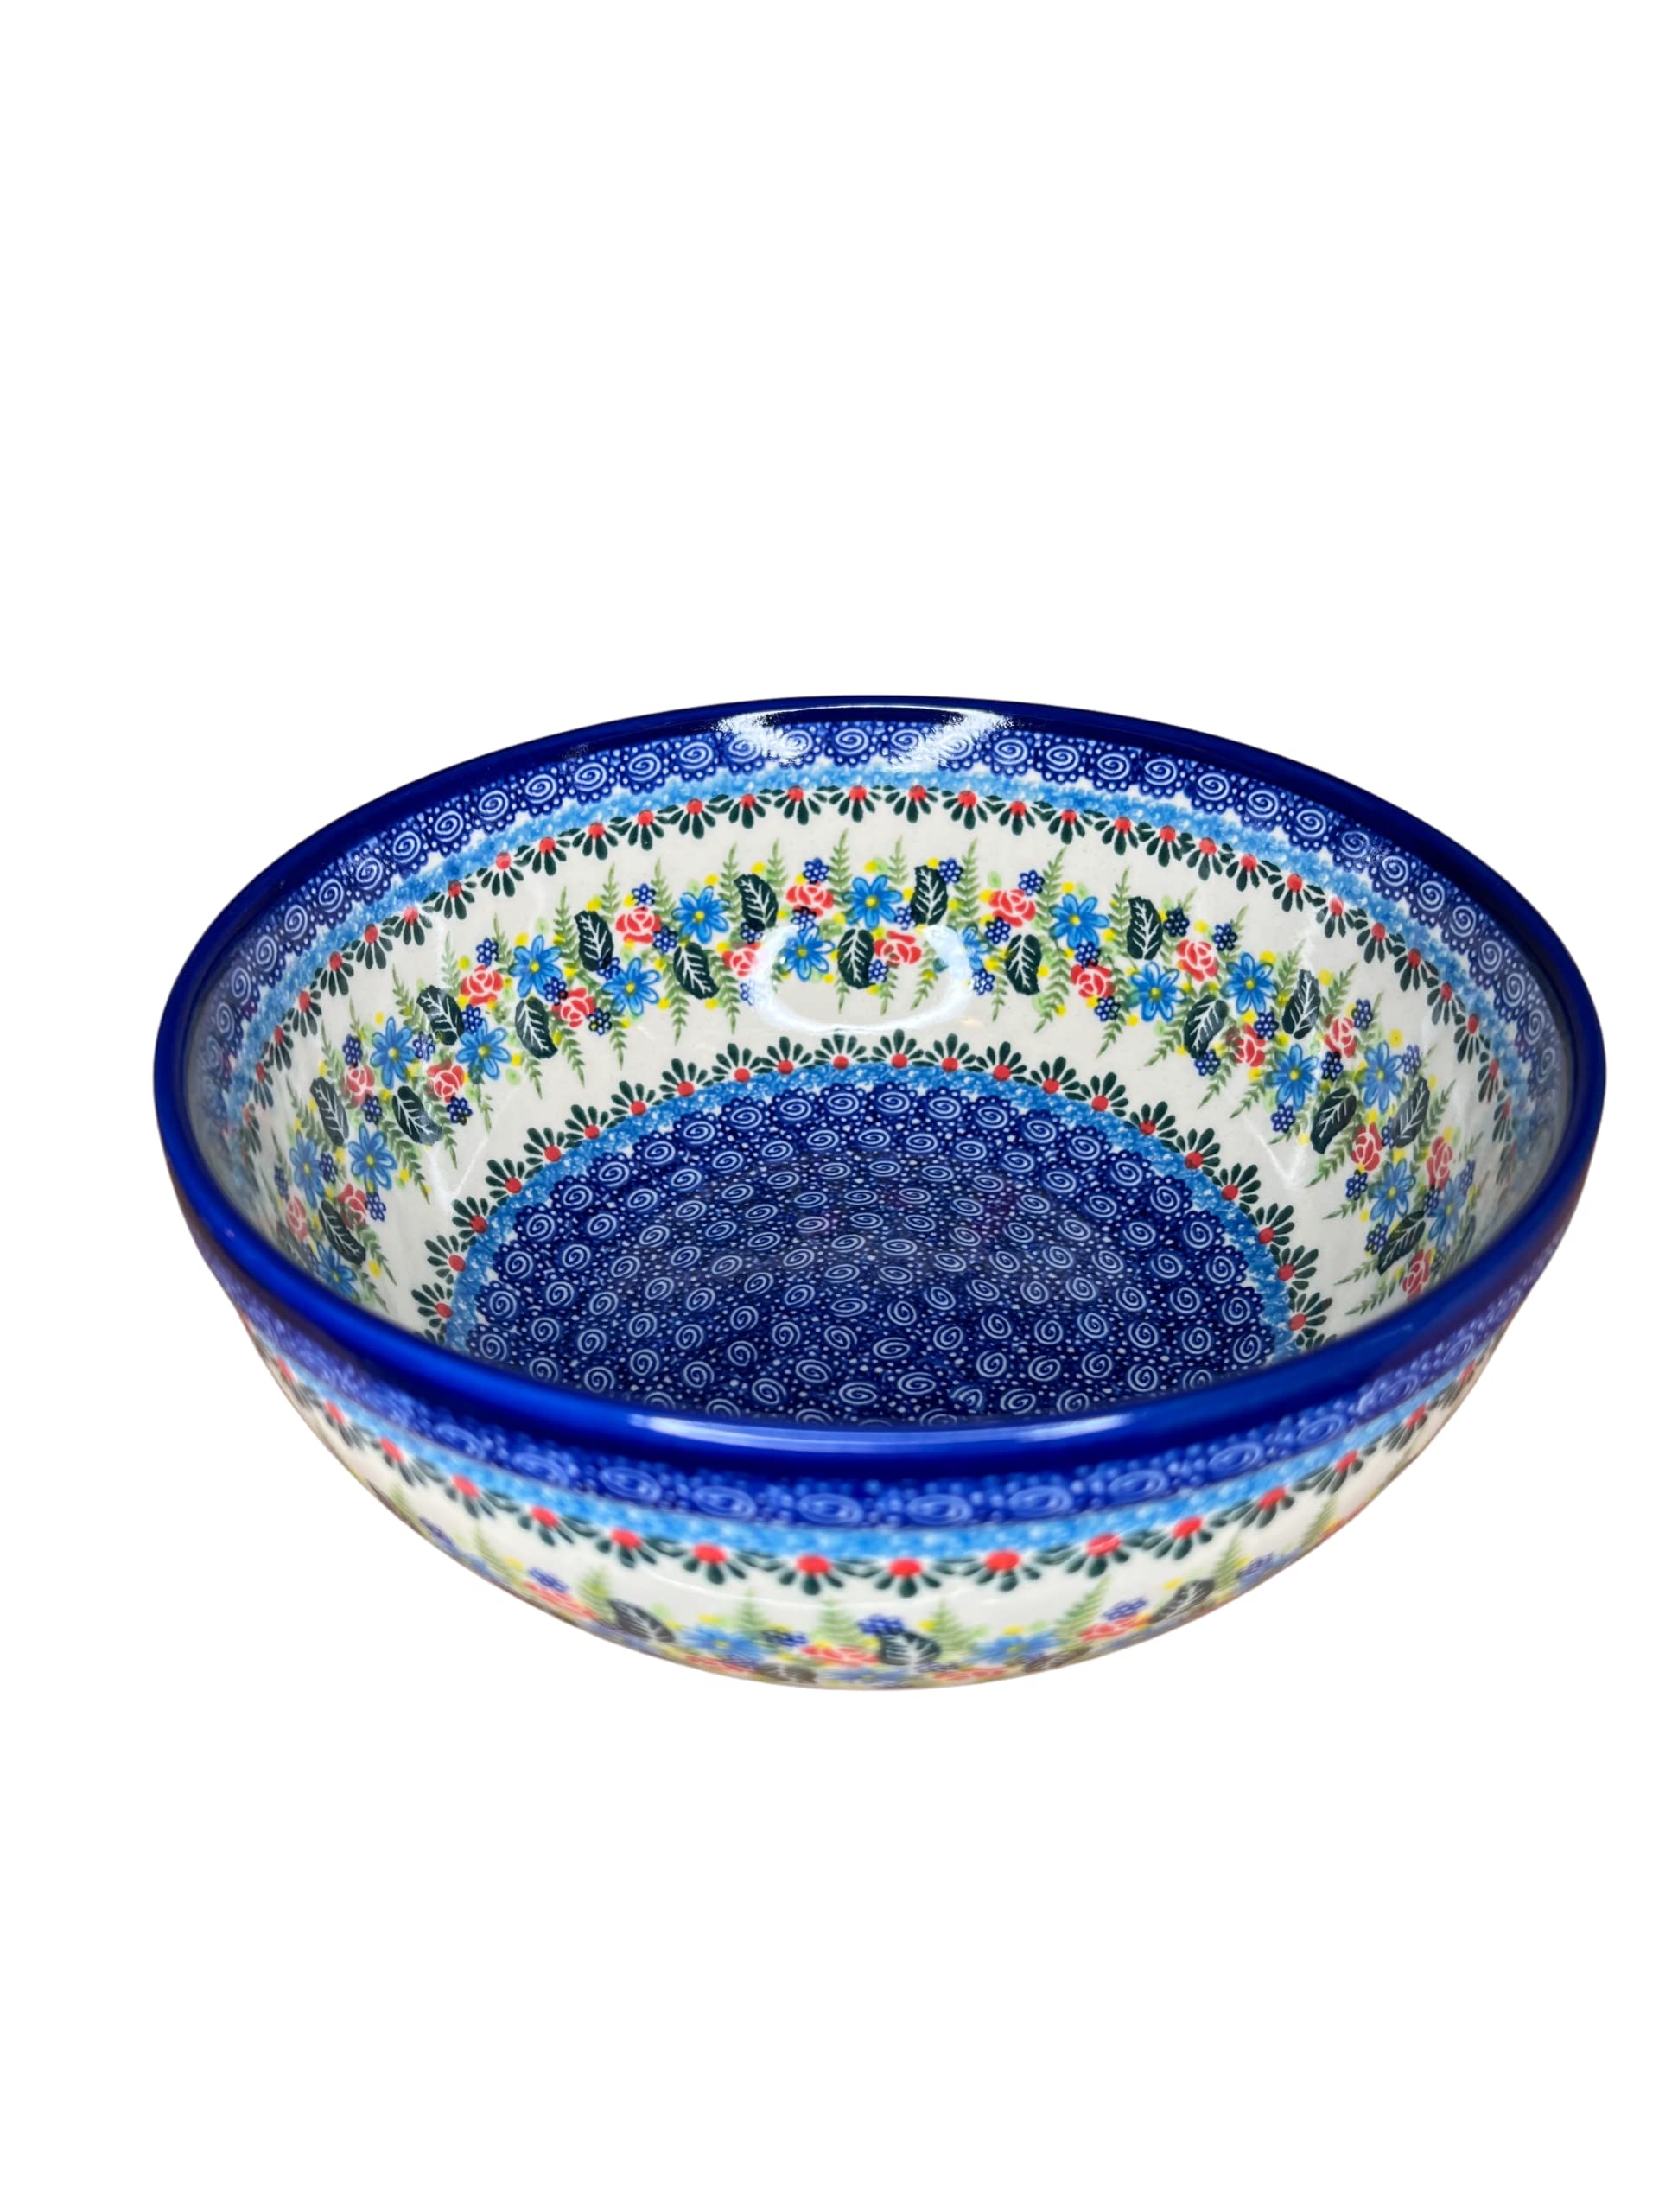 Lidia's Polish Pottery 10 cup 9.25 inch Serving Bowl- Ceramika Kalich- Daisy